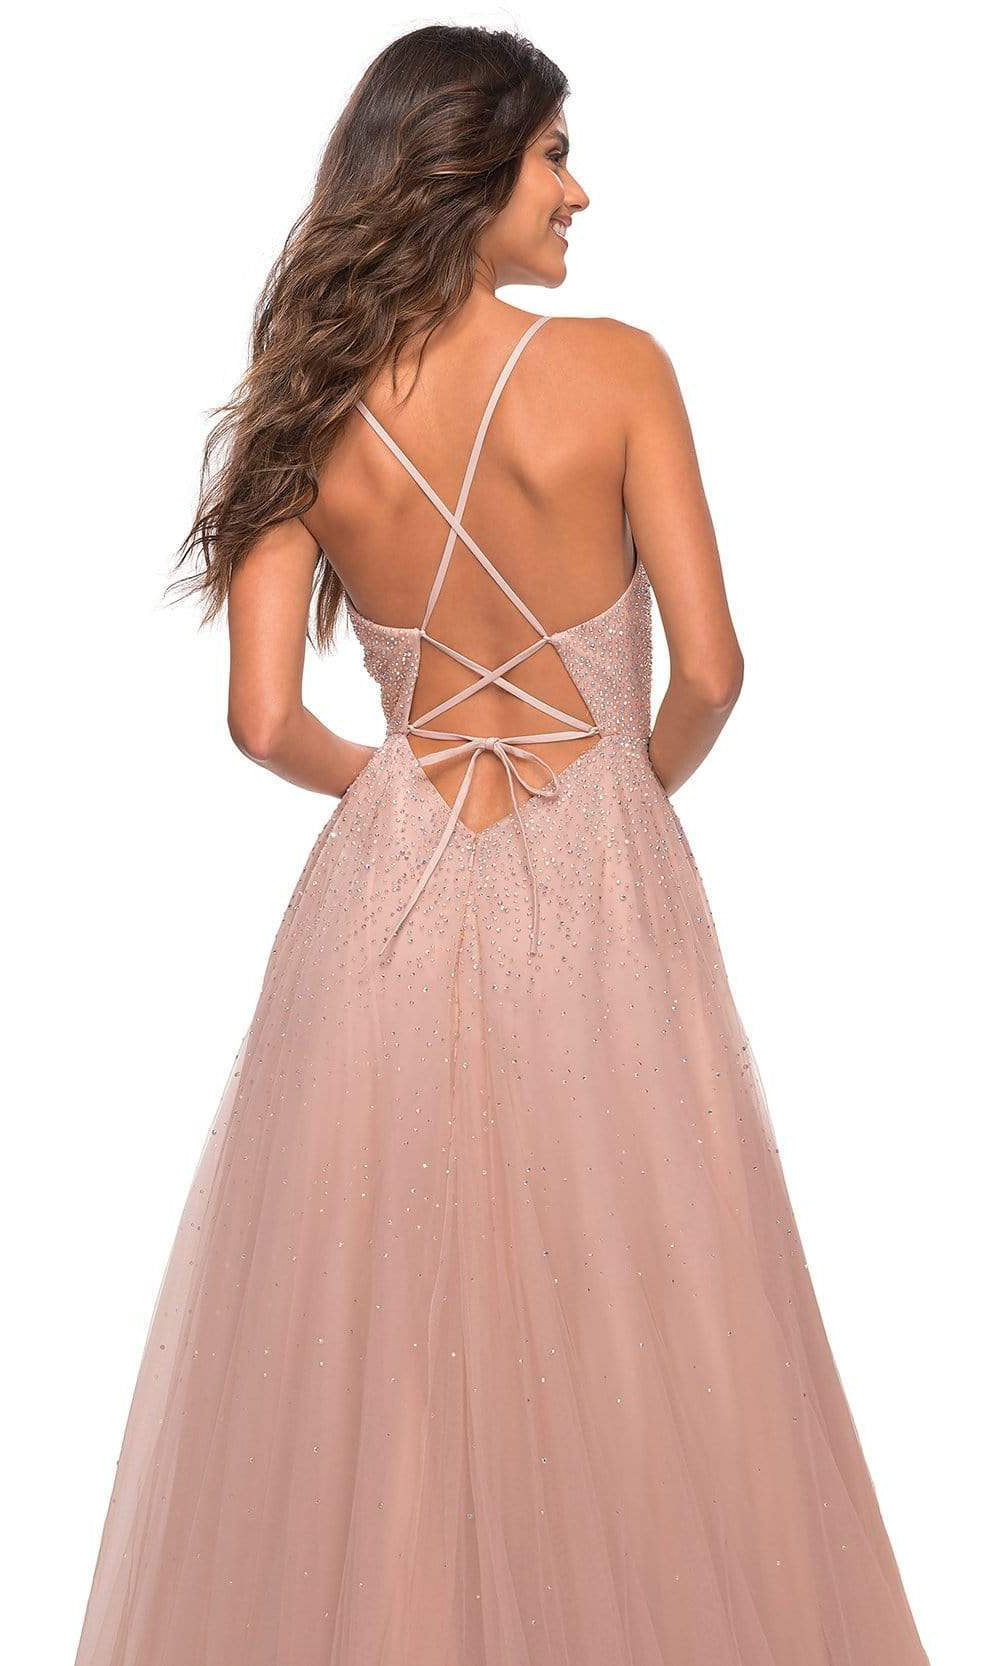 La Femme - 29920 A-Line Beaded Allover Long Dress In Pink and Neutral